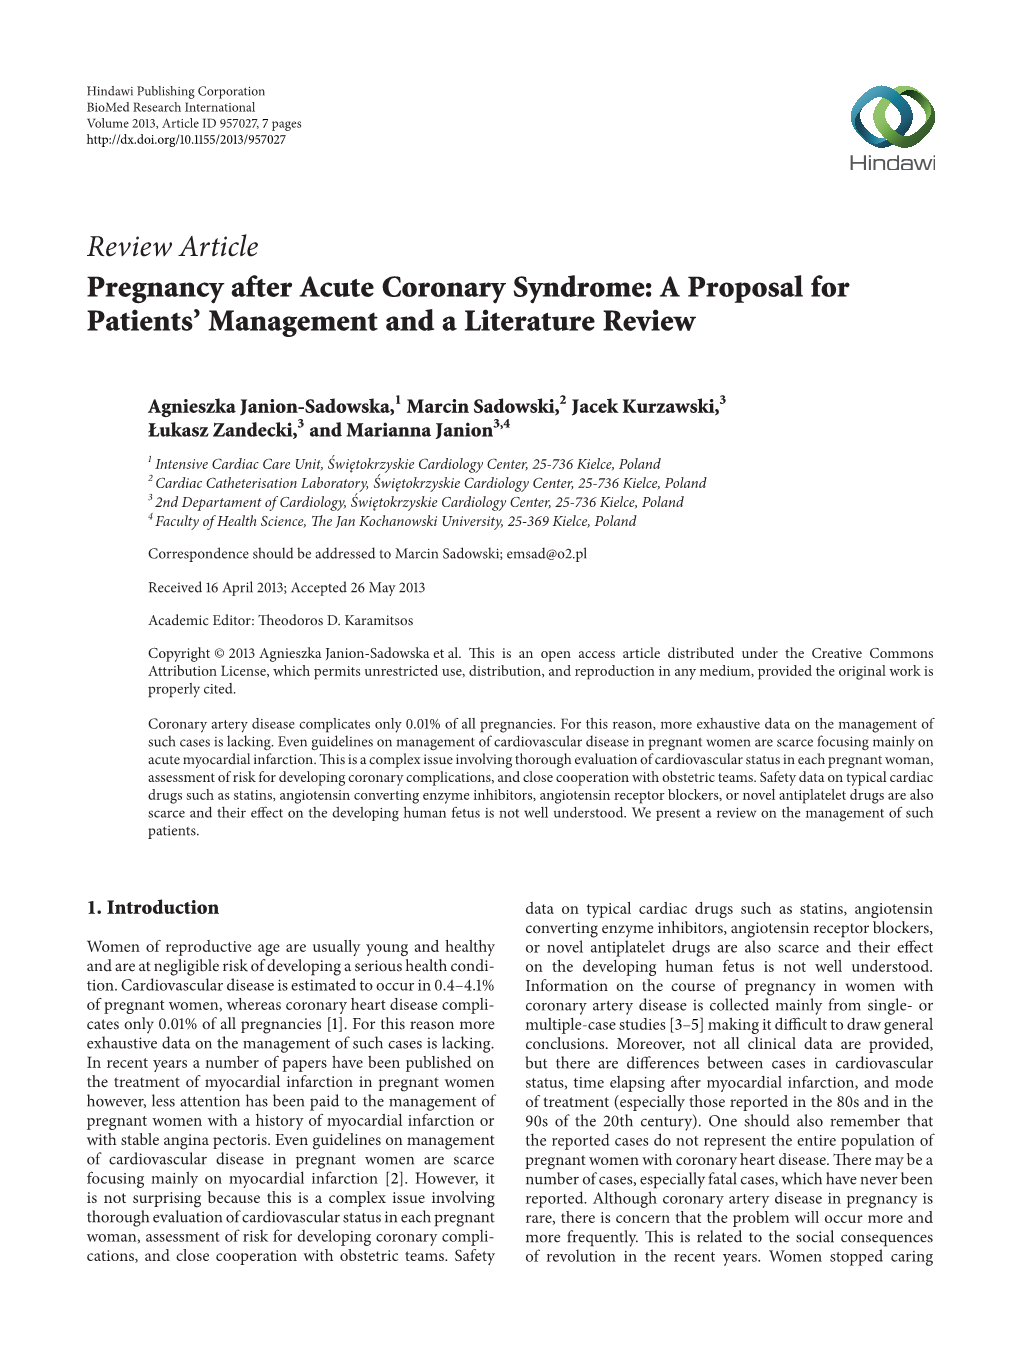 Pregnancy After Acute Coronary Syndrome: a Proposal for Patients’ Management and a Literature Review